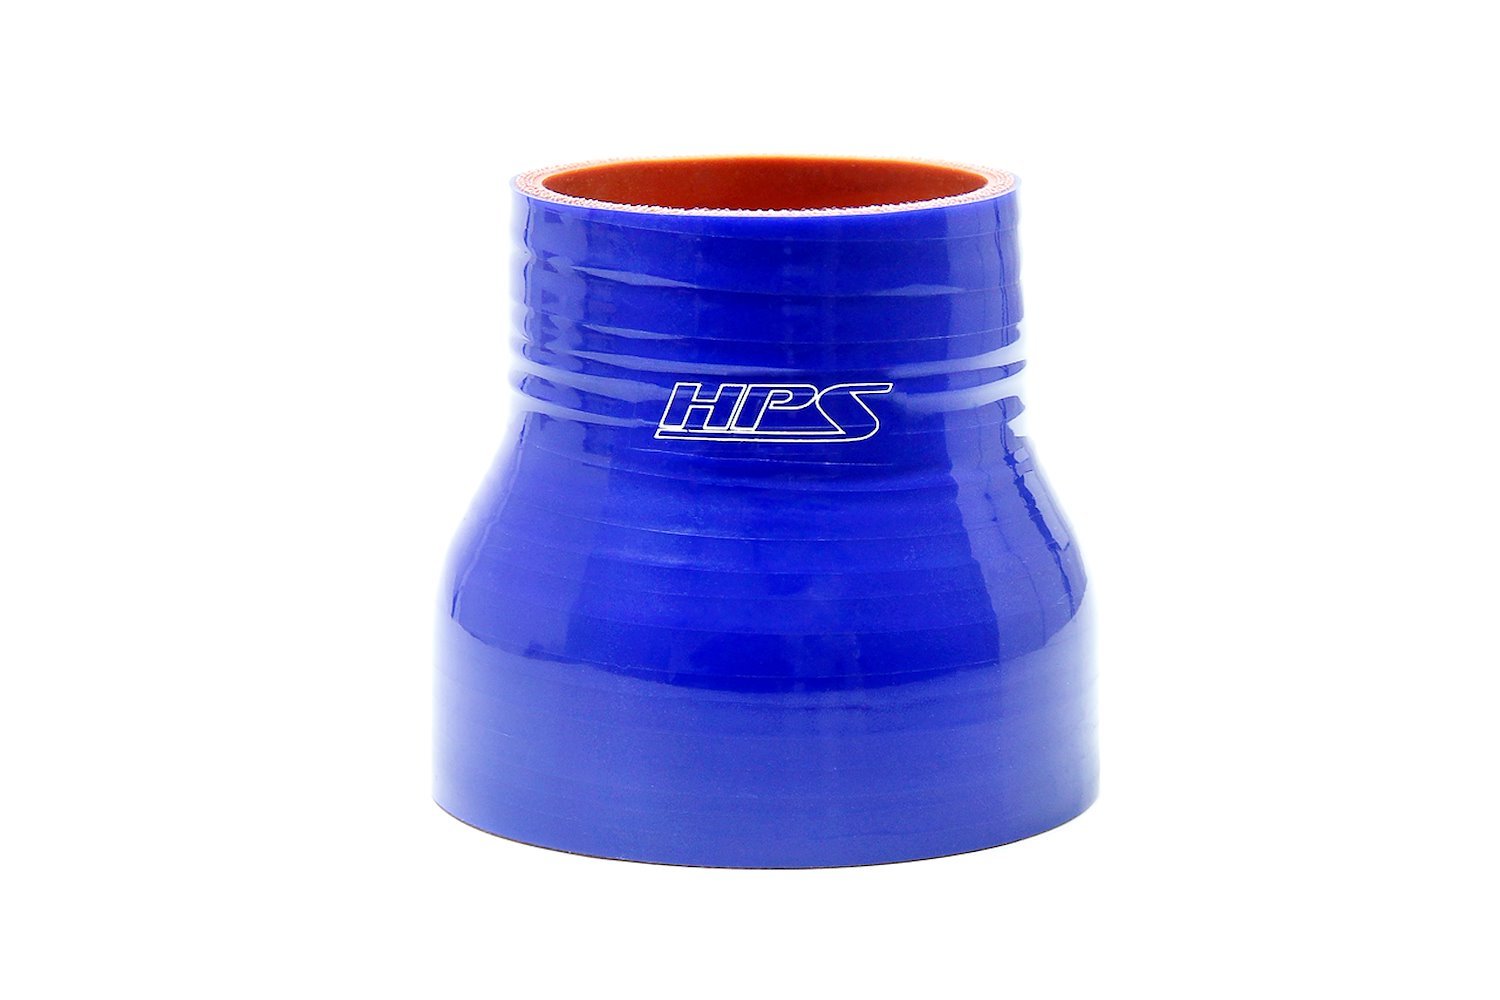 HTSR-275-300-BLUE Silicone Reducer Hose, High-Temp 4-Ply Reinforced, 2-3/4 in. - 3 in. ID, 3 in. Long, Blue